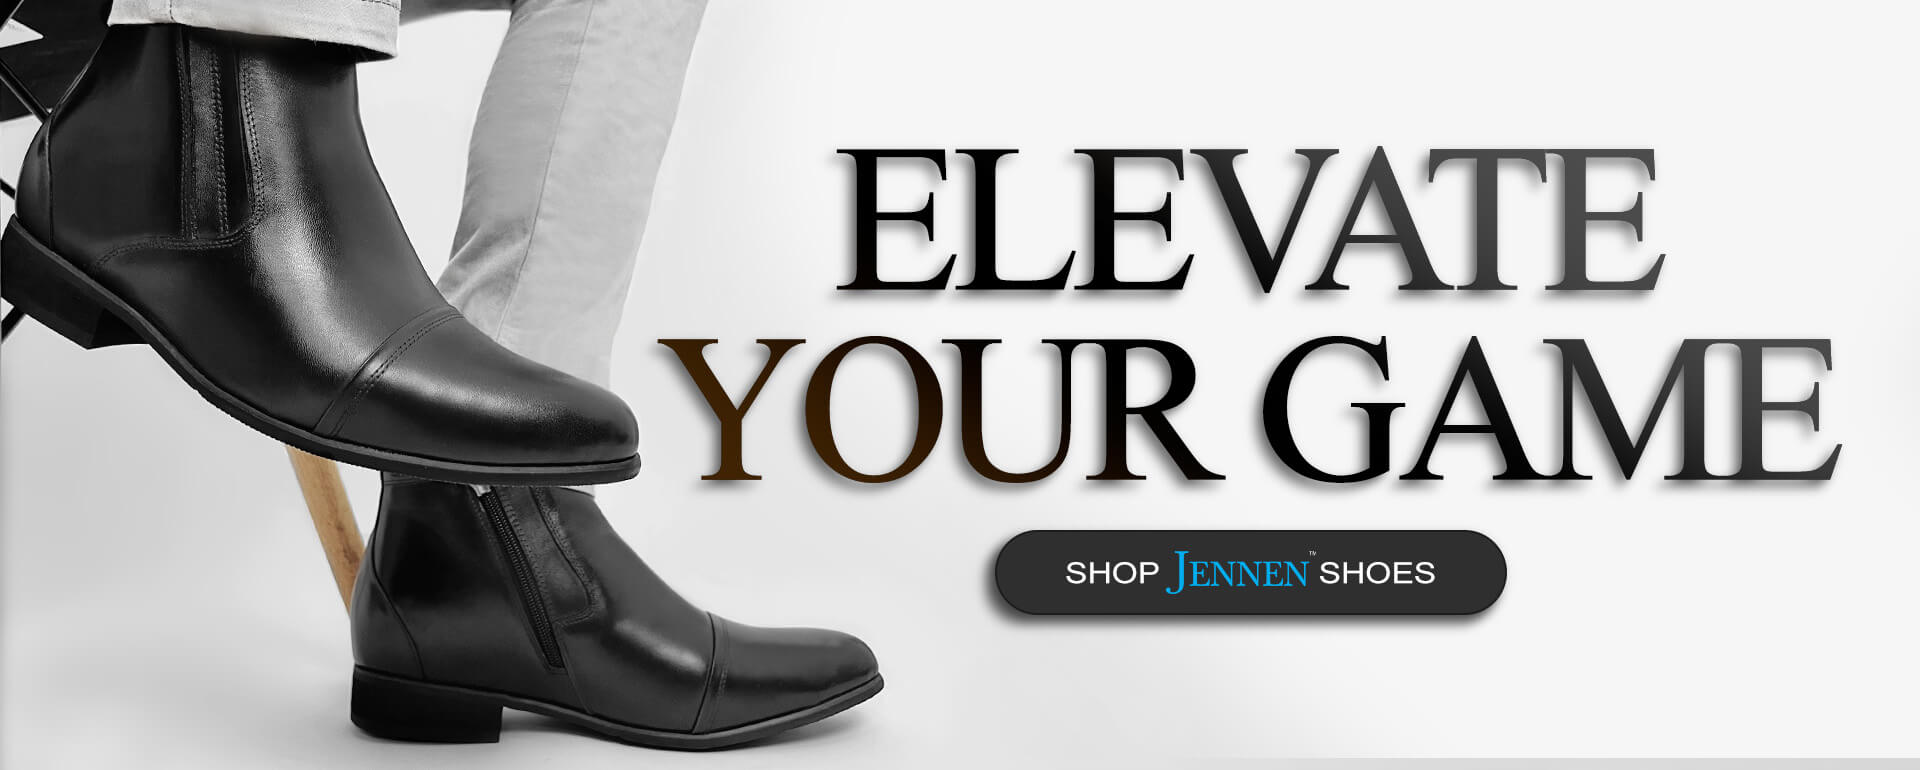 Elevate your game with JENNEN Shoes